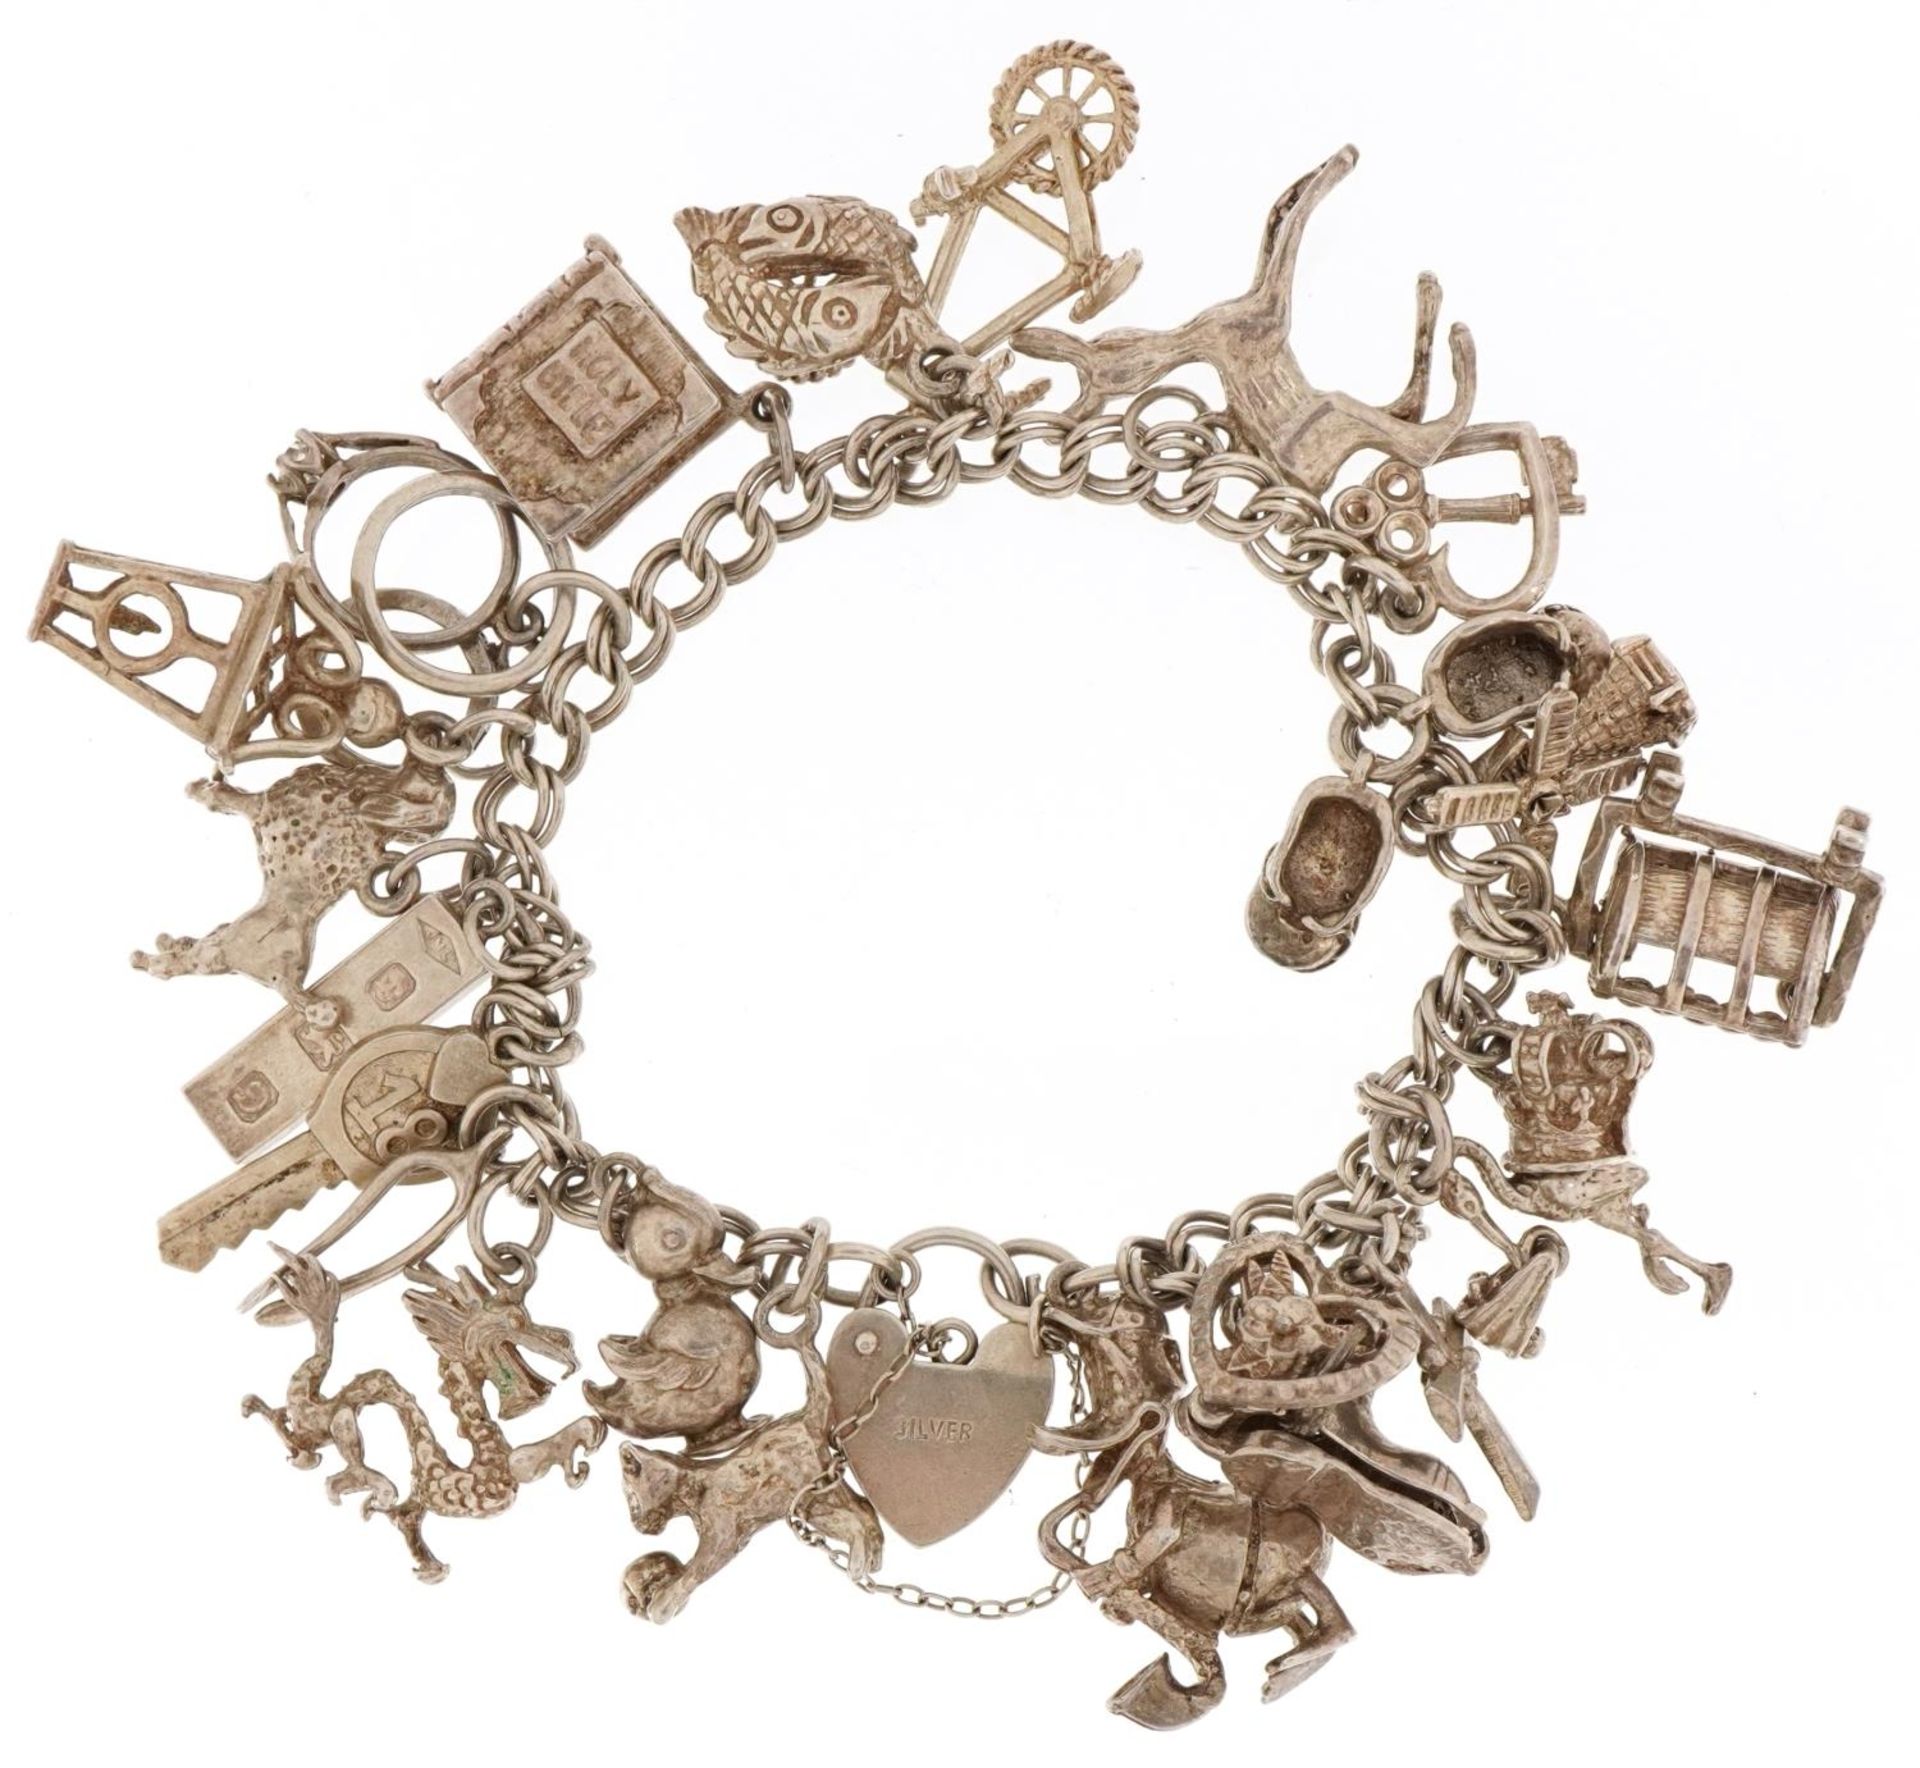 Silver charm bracelet with a large collection of mostly silver charms, 66.6g - Image 2 of 3